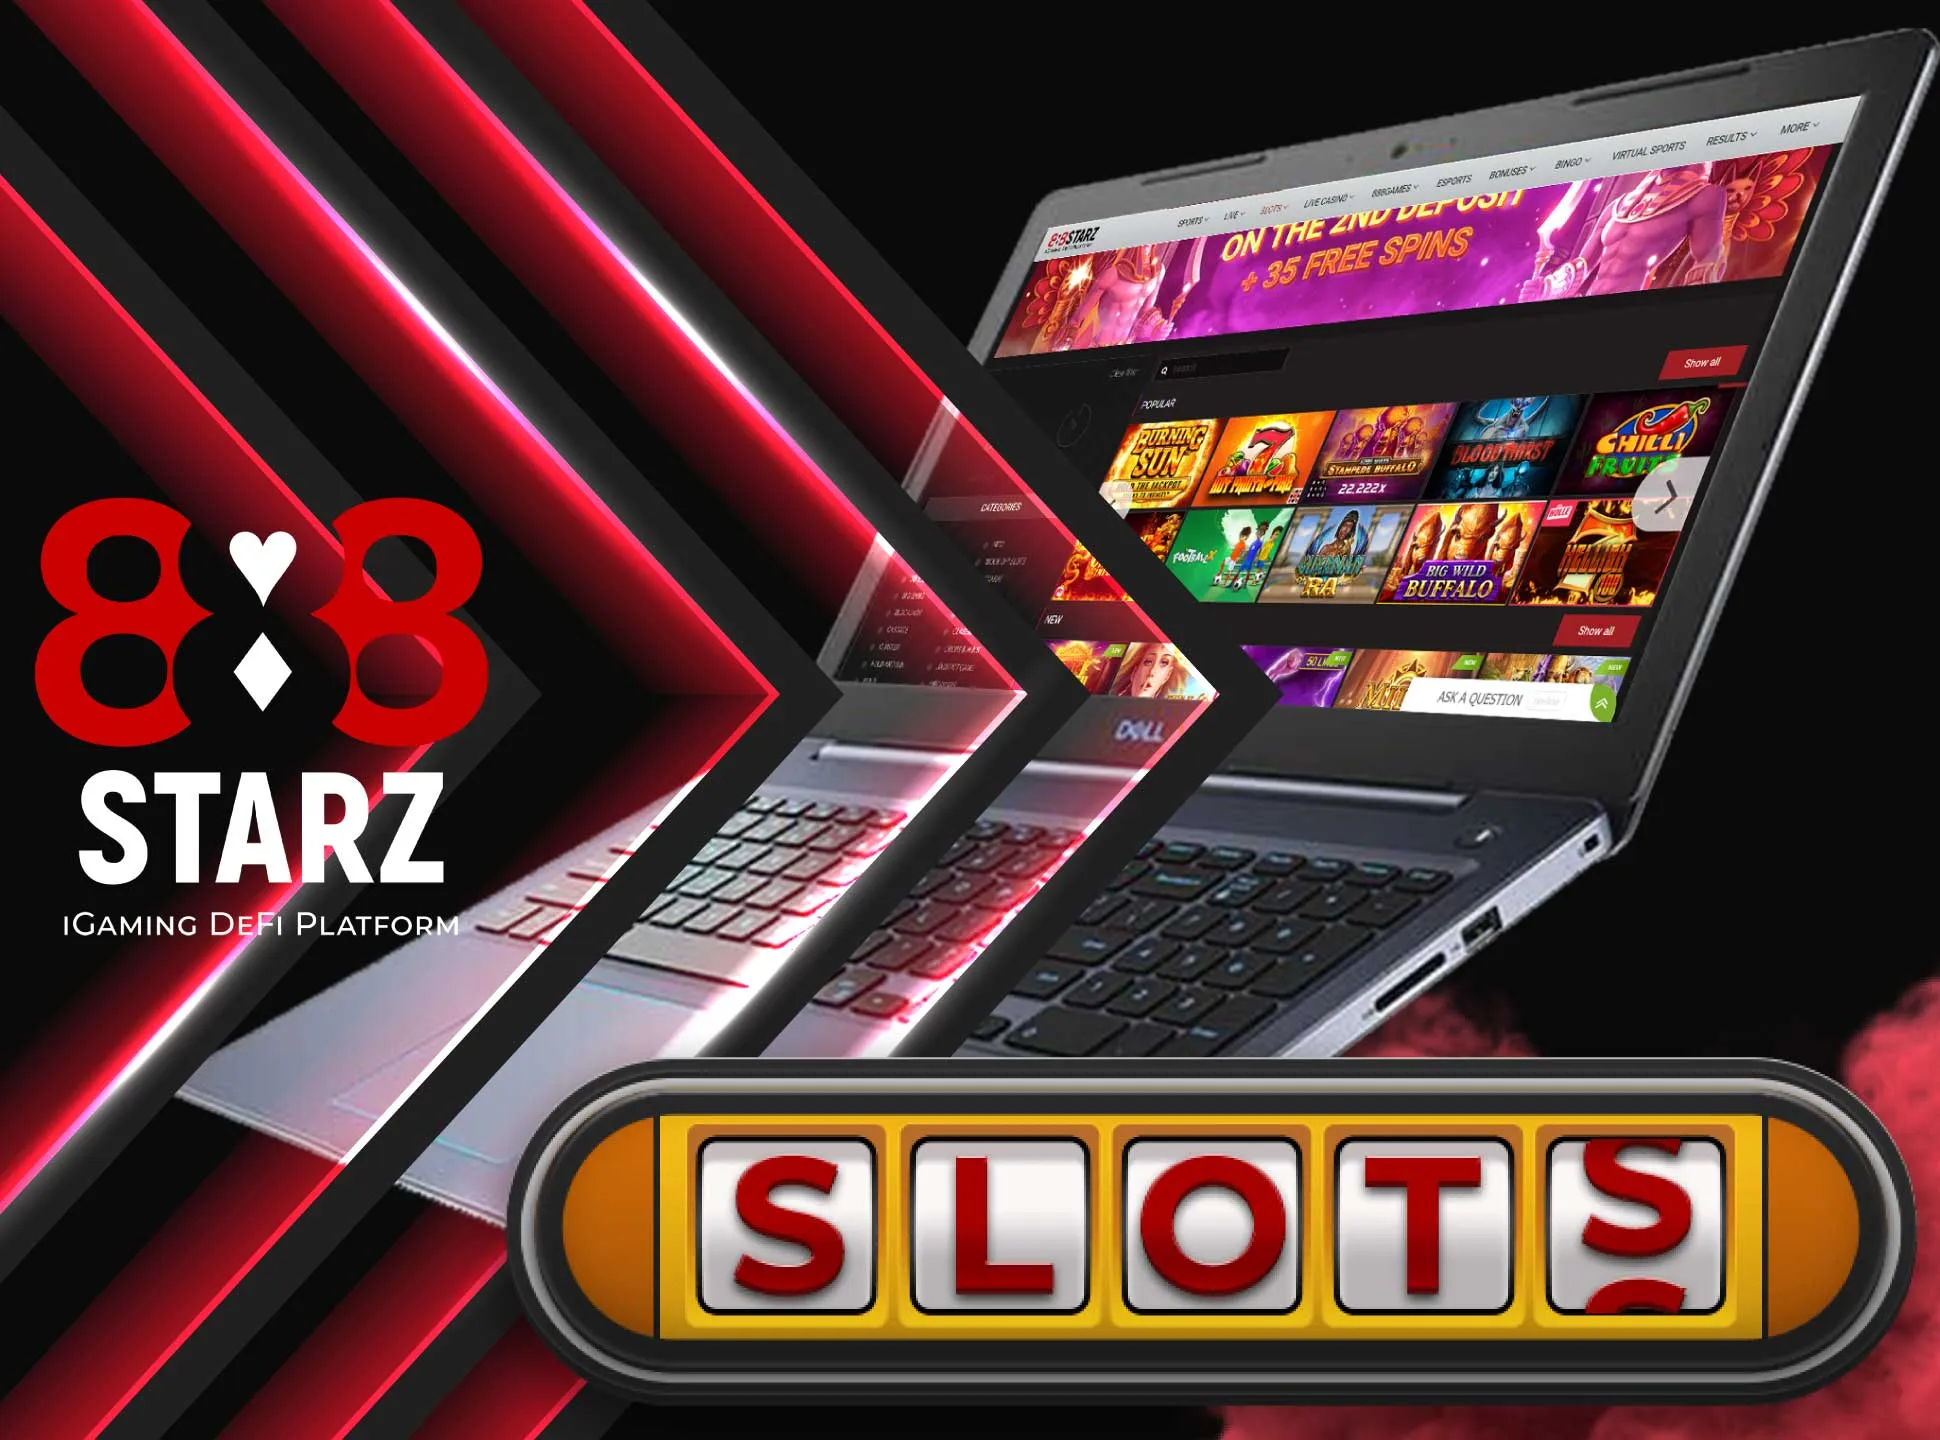 You will find many slots from different providers in the 888starz casino.